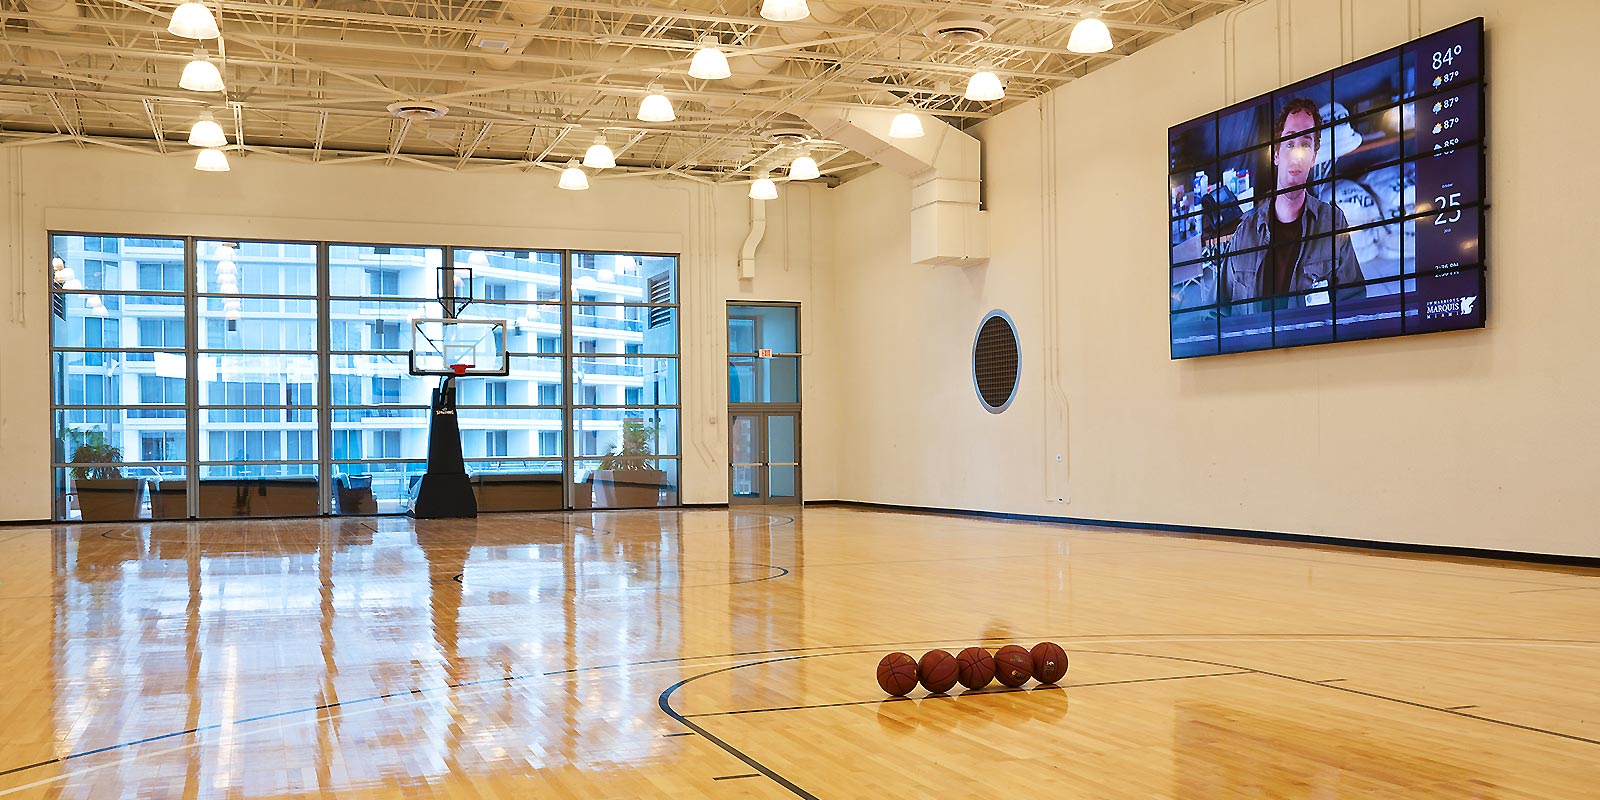 NBA-Approved Basketball Court